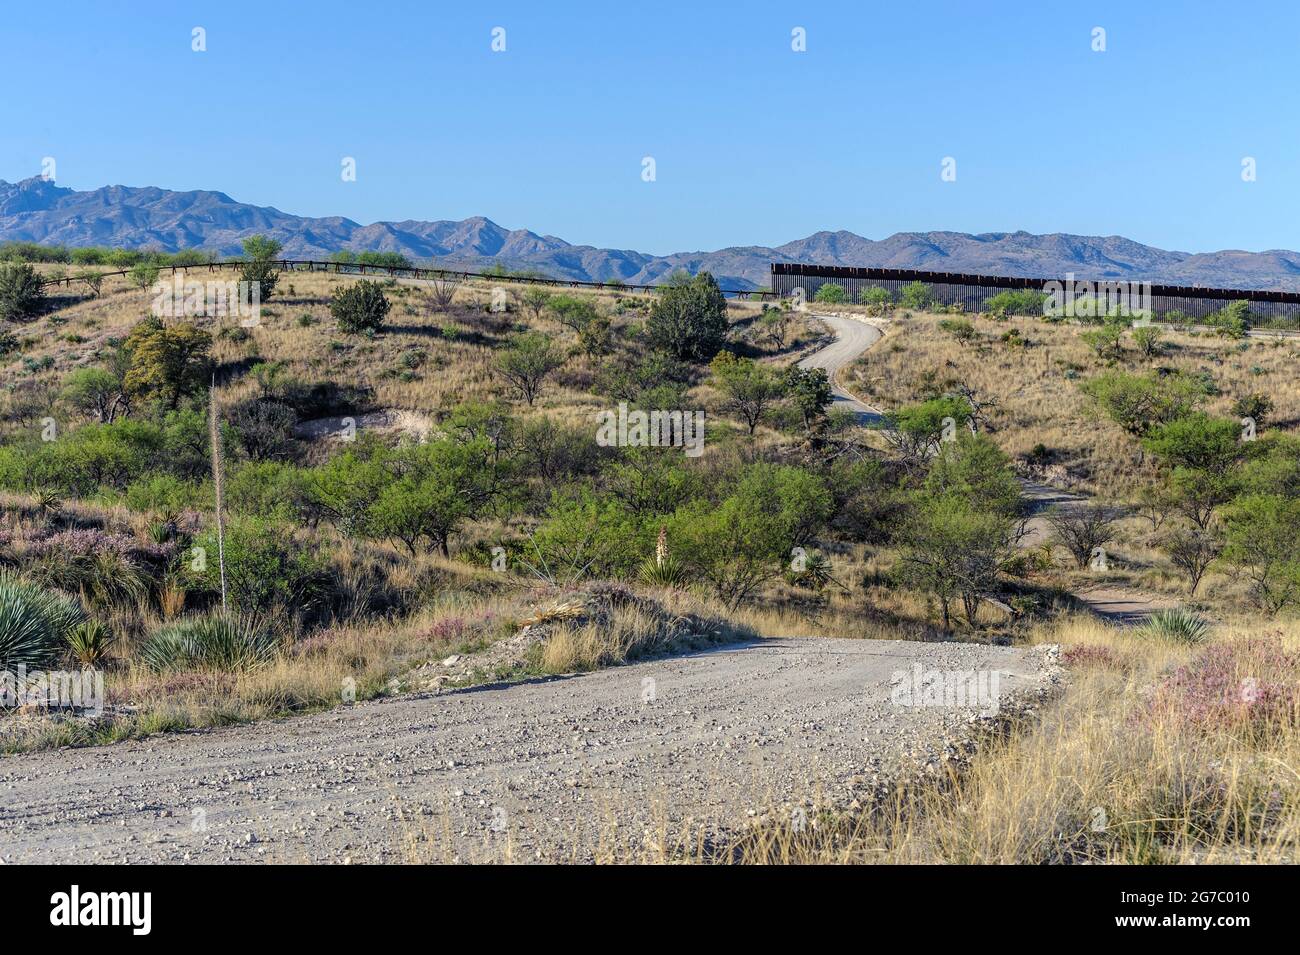 US border fence on the Mexico border, east of Nogales Arizona and Nogales Sonora Mexico, viewed from US side looking due south. On the right is tall “ Stock Photo